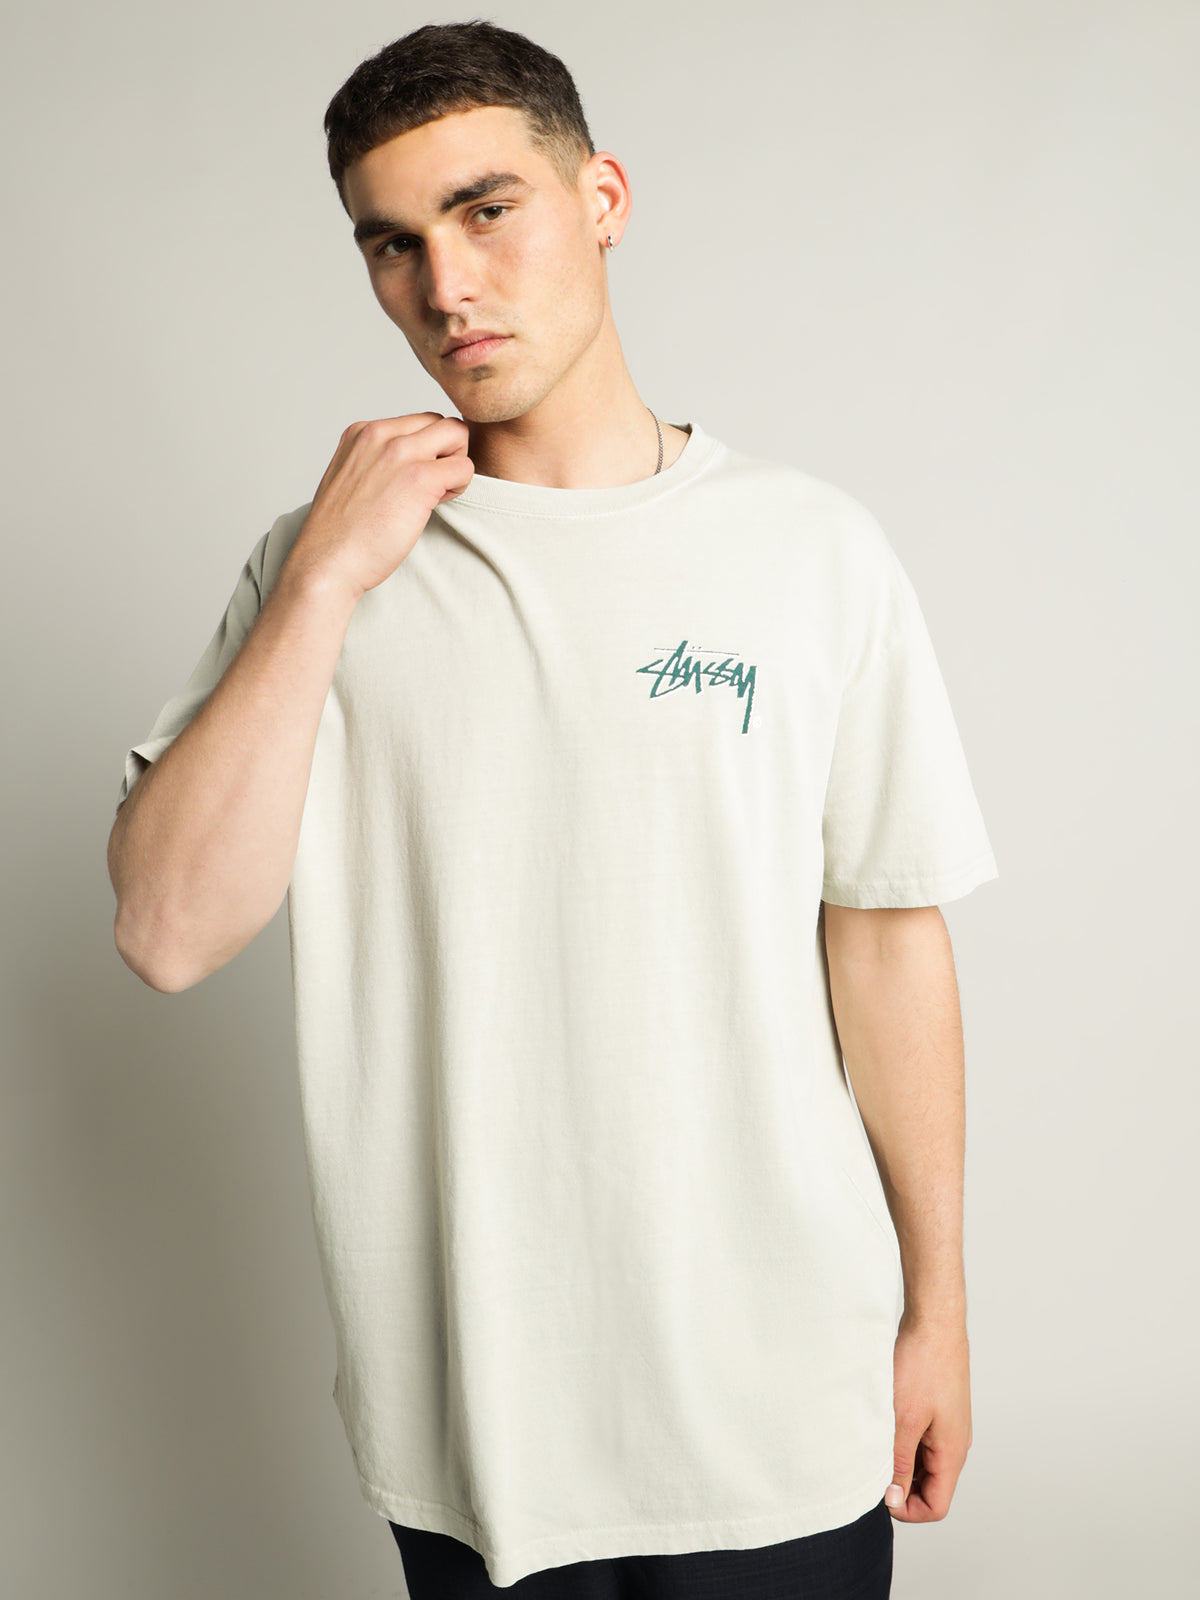 Shadow Stock T-Shirt in Pigment White Sand